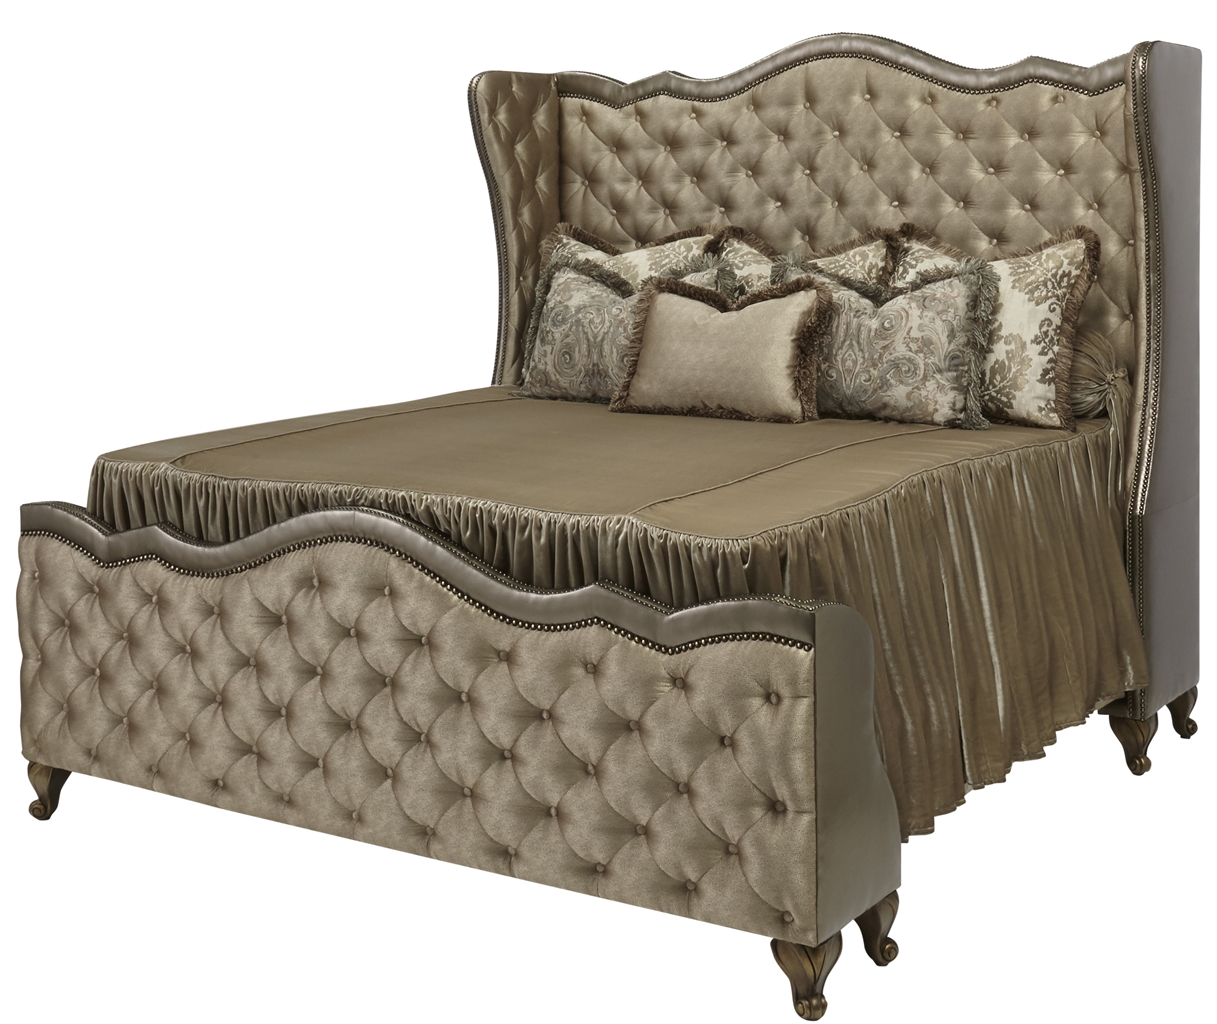 BEDS - Queen, King & California King Sizes Plush Tufted Upholstered Bed